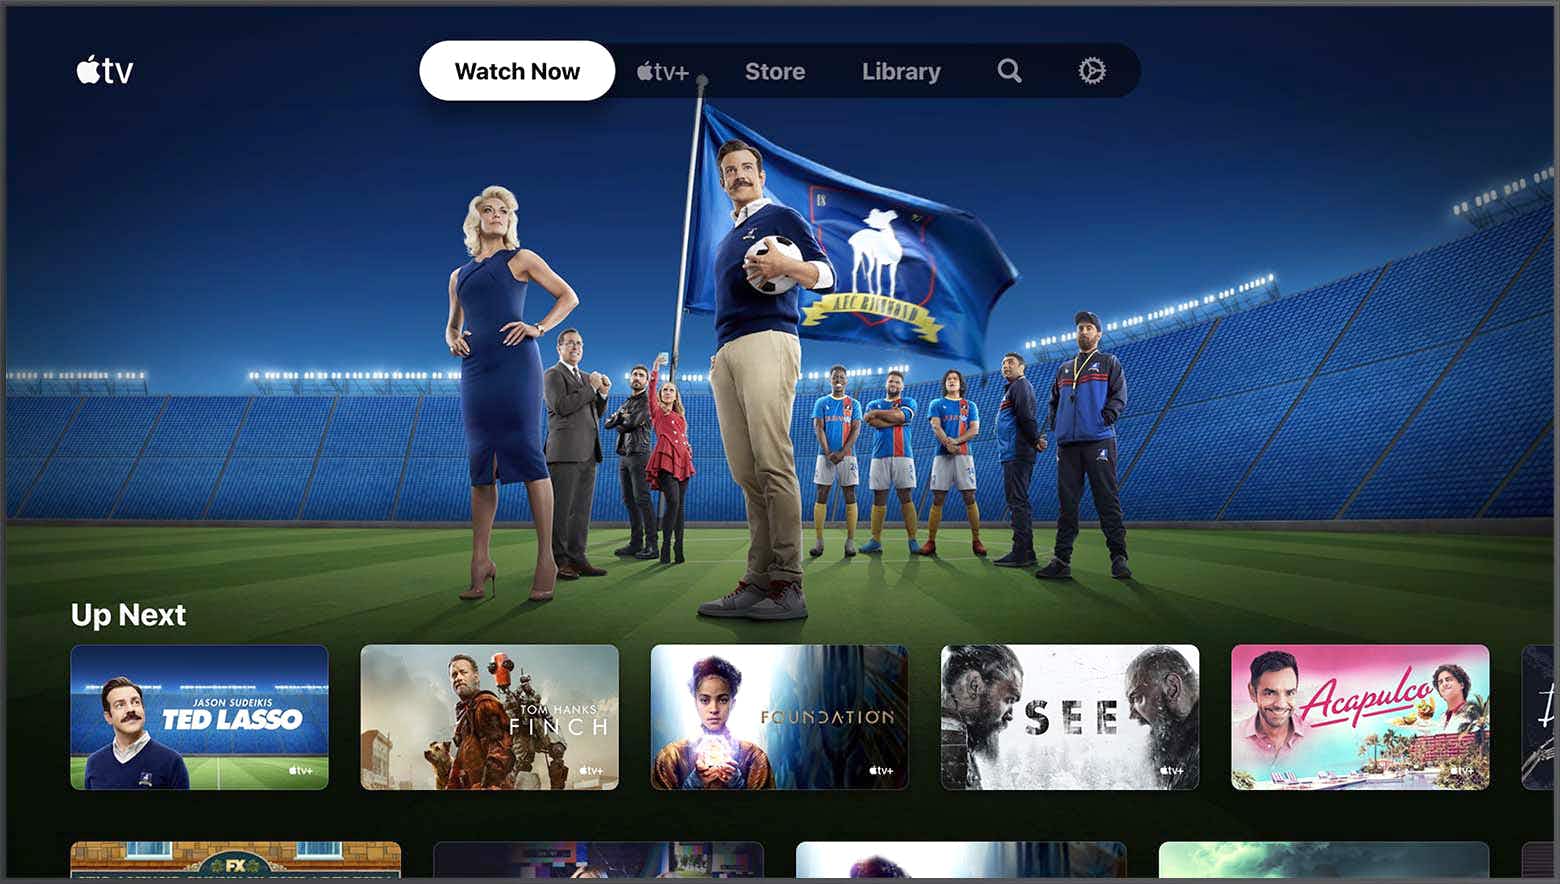 apple tv screen with ted lasso show featured